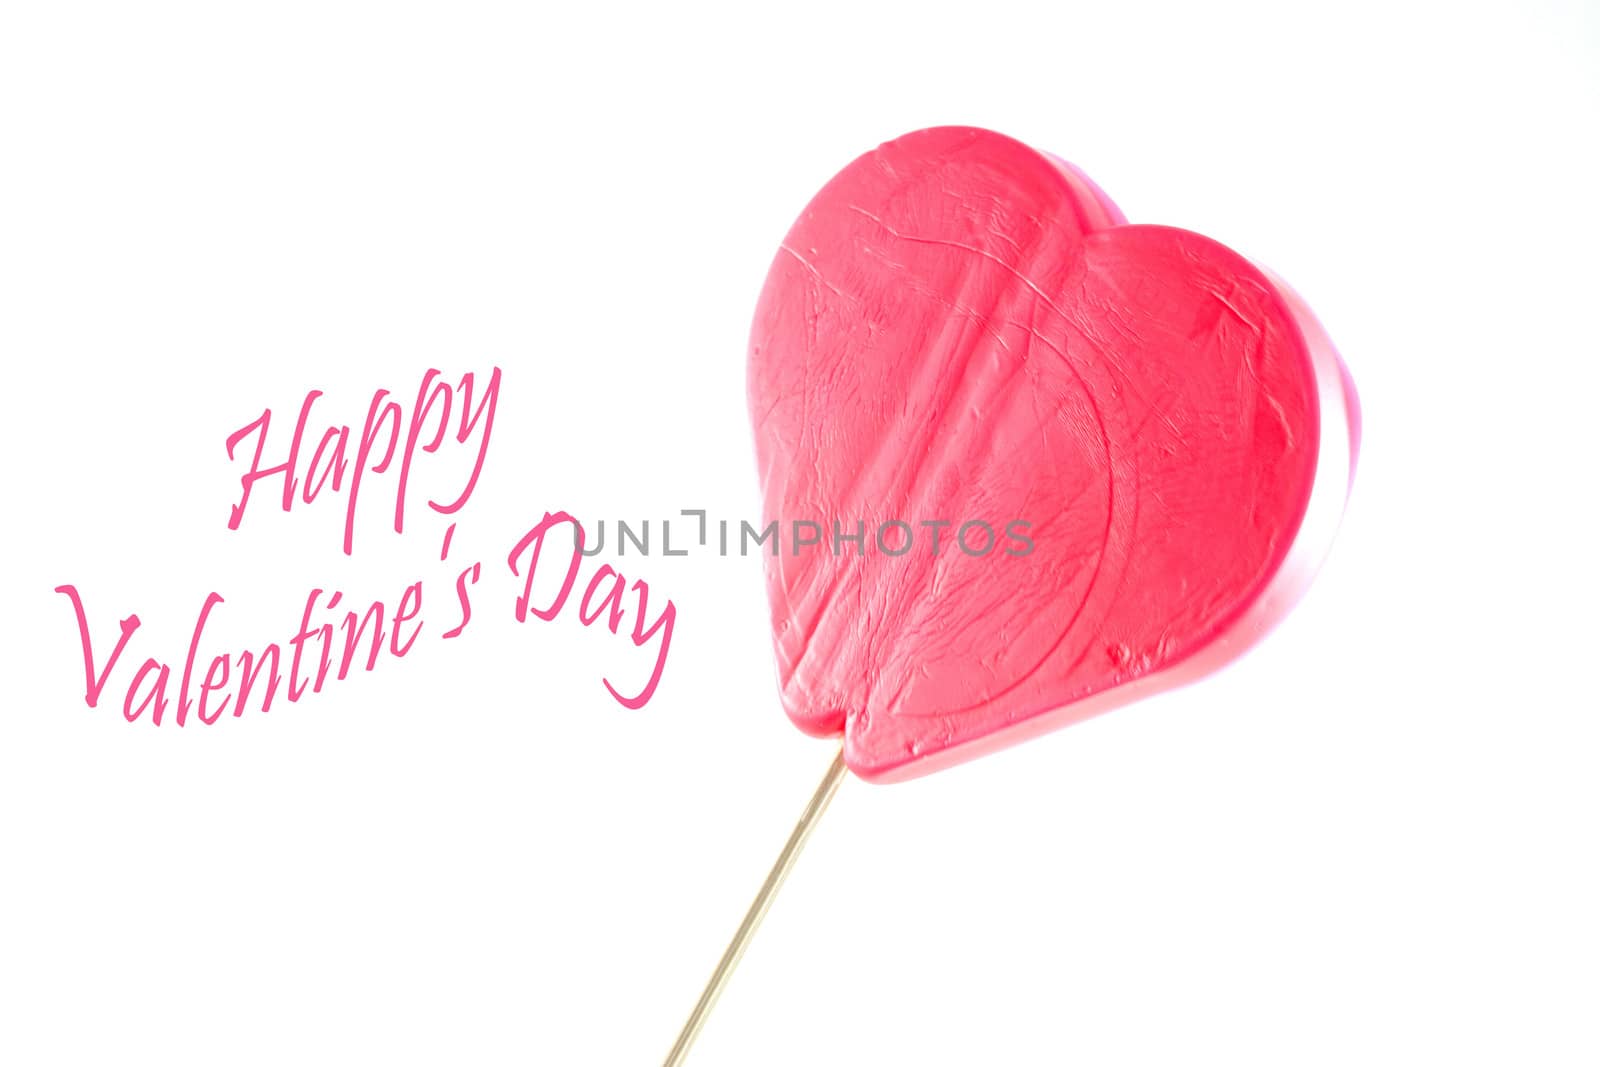 Heart shaped lollipop with valentine greeting